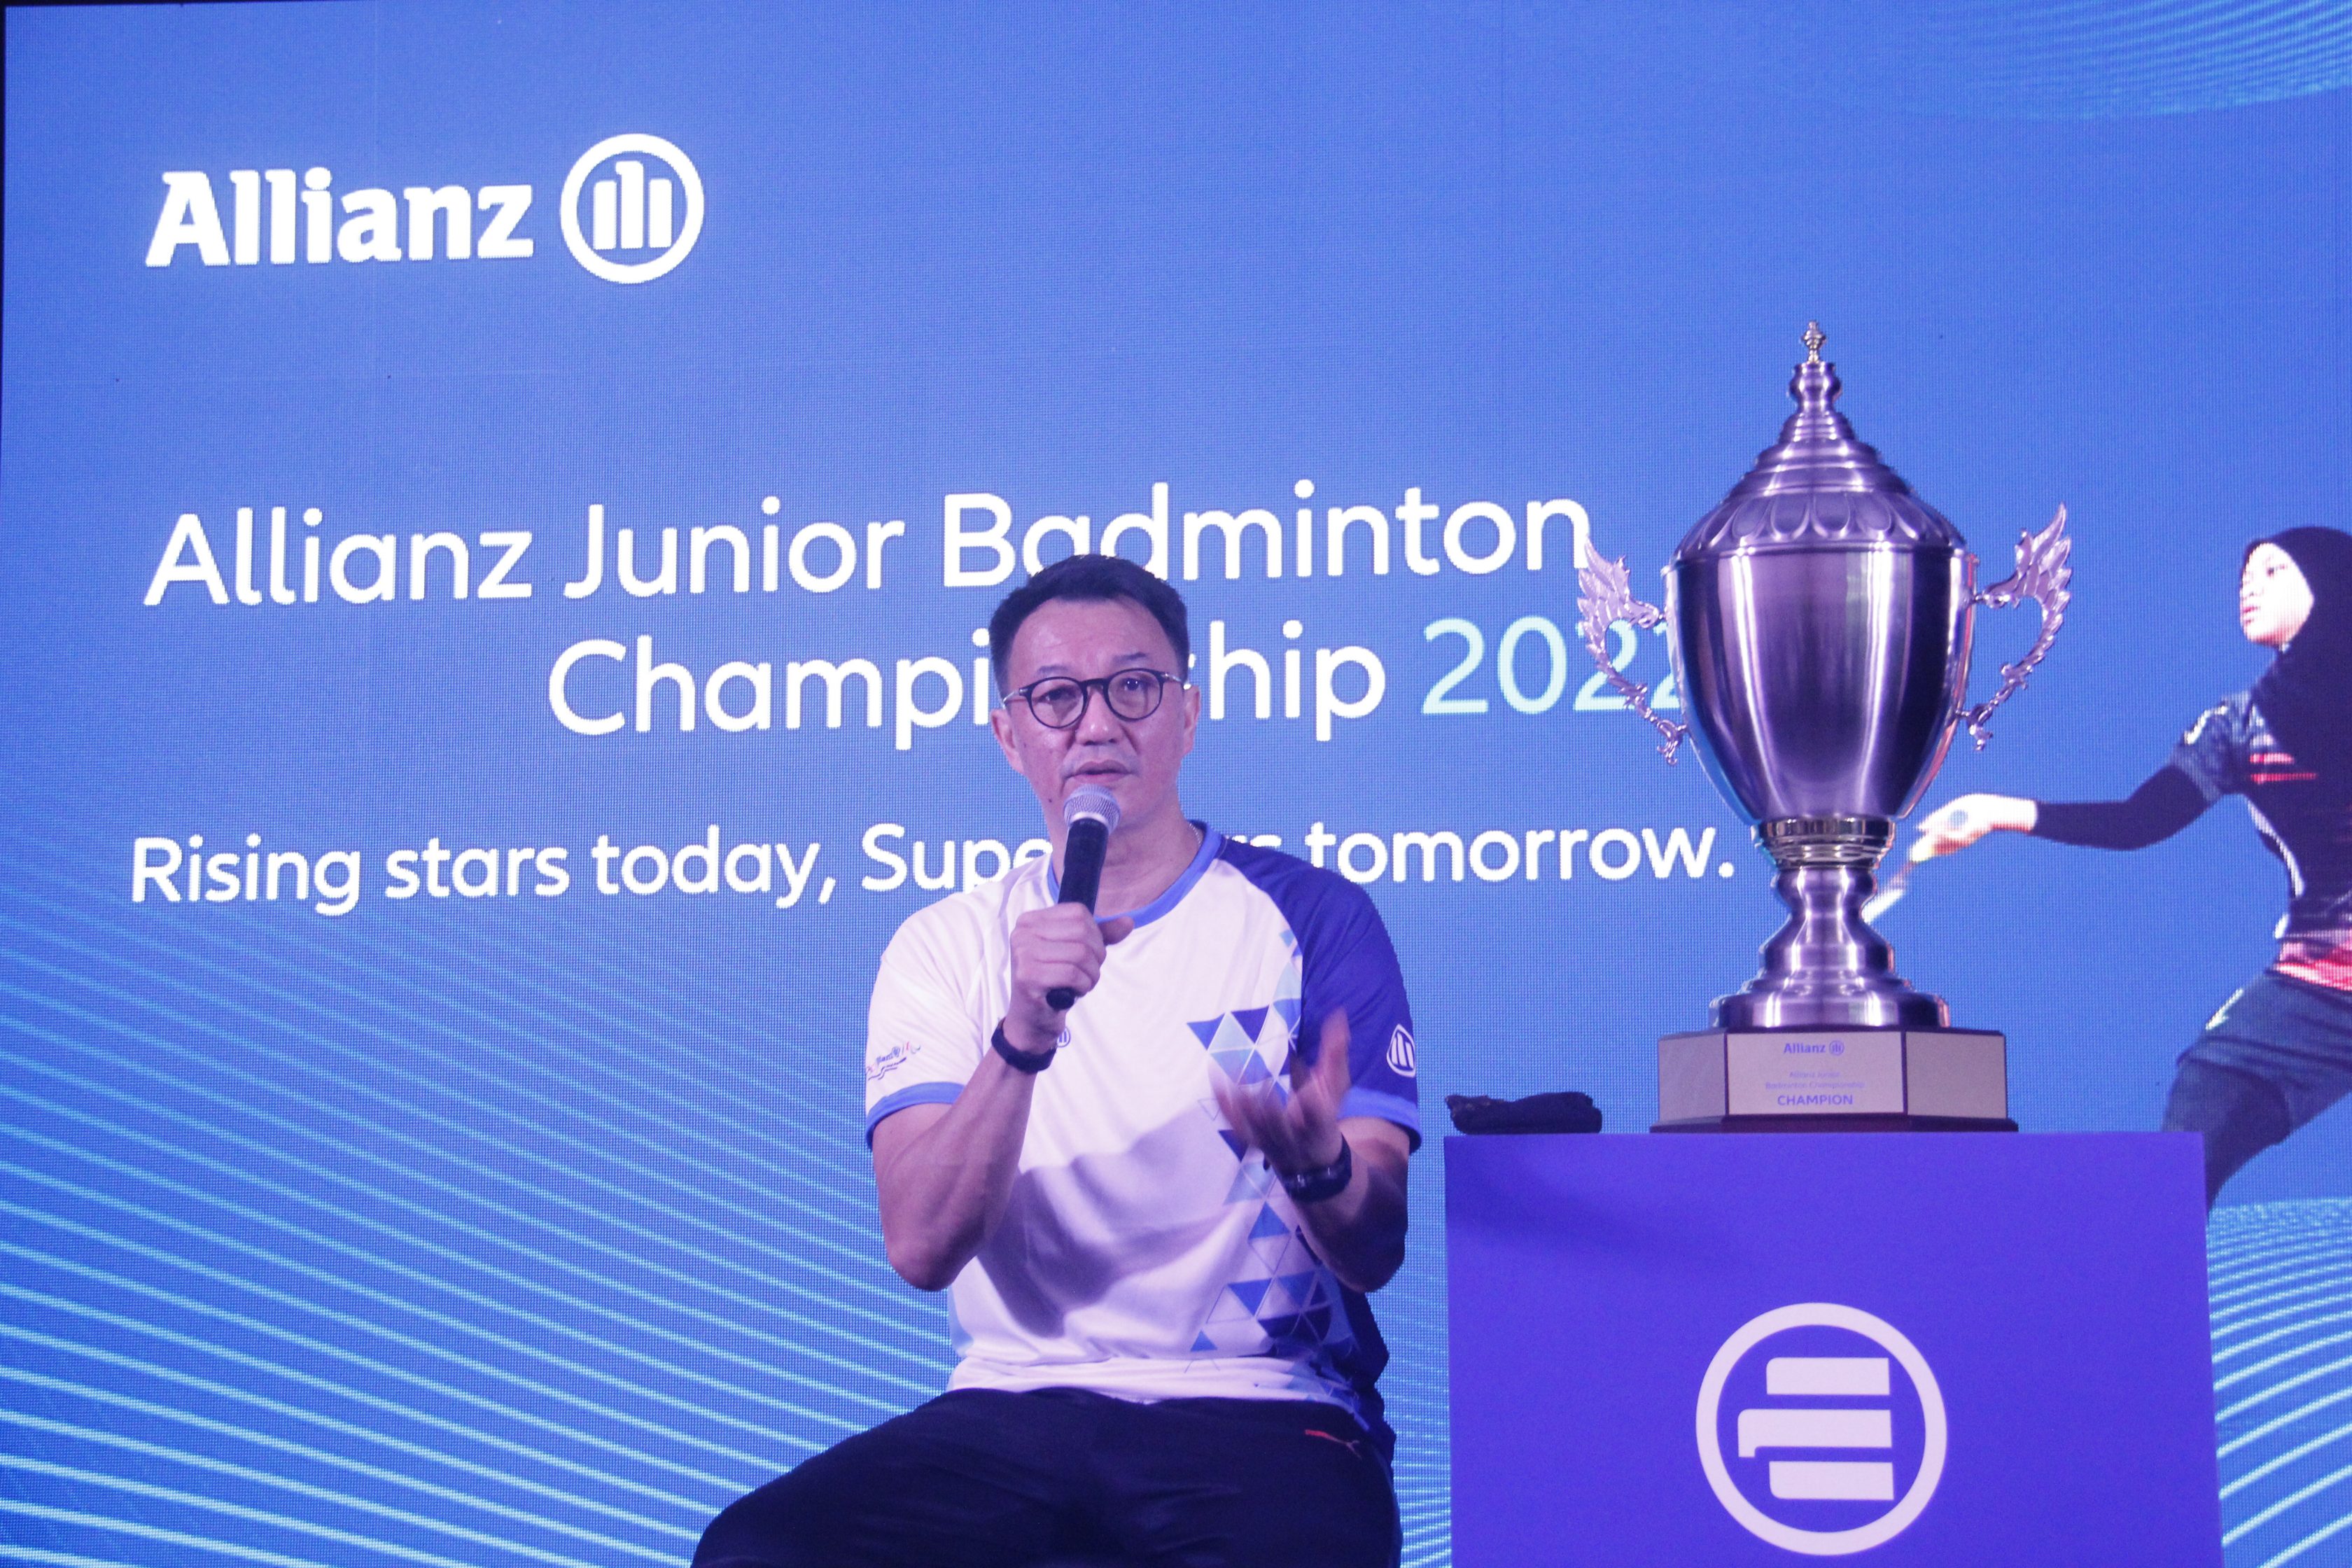 Allianz Malaysia Berhad CEO, Sean Wang addresses the crowd during the launch and prize presentation for the Allianz Junior Badminton Championship 2022